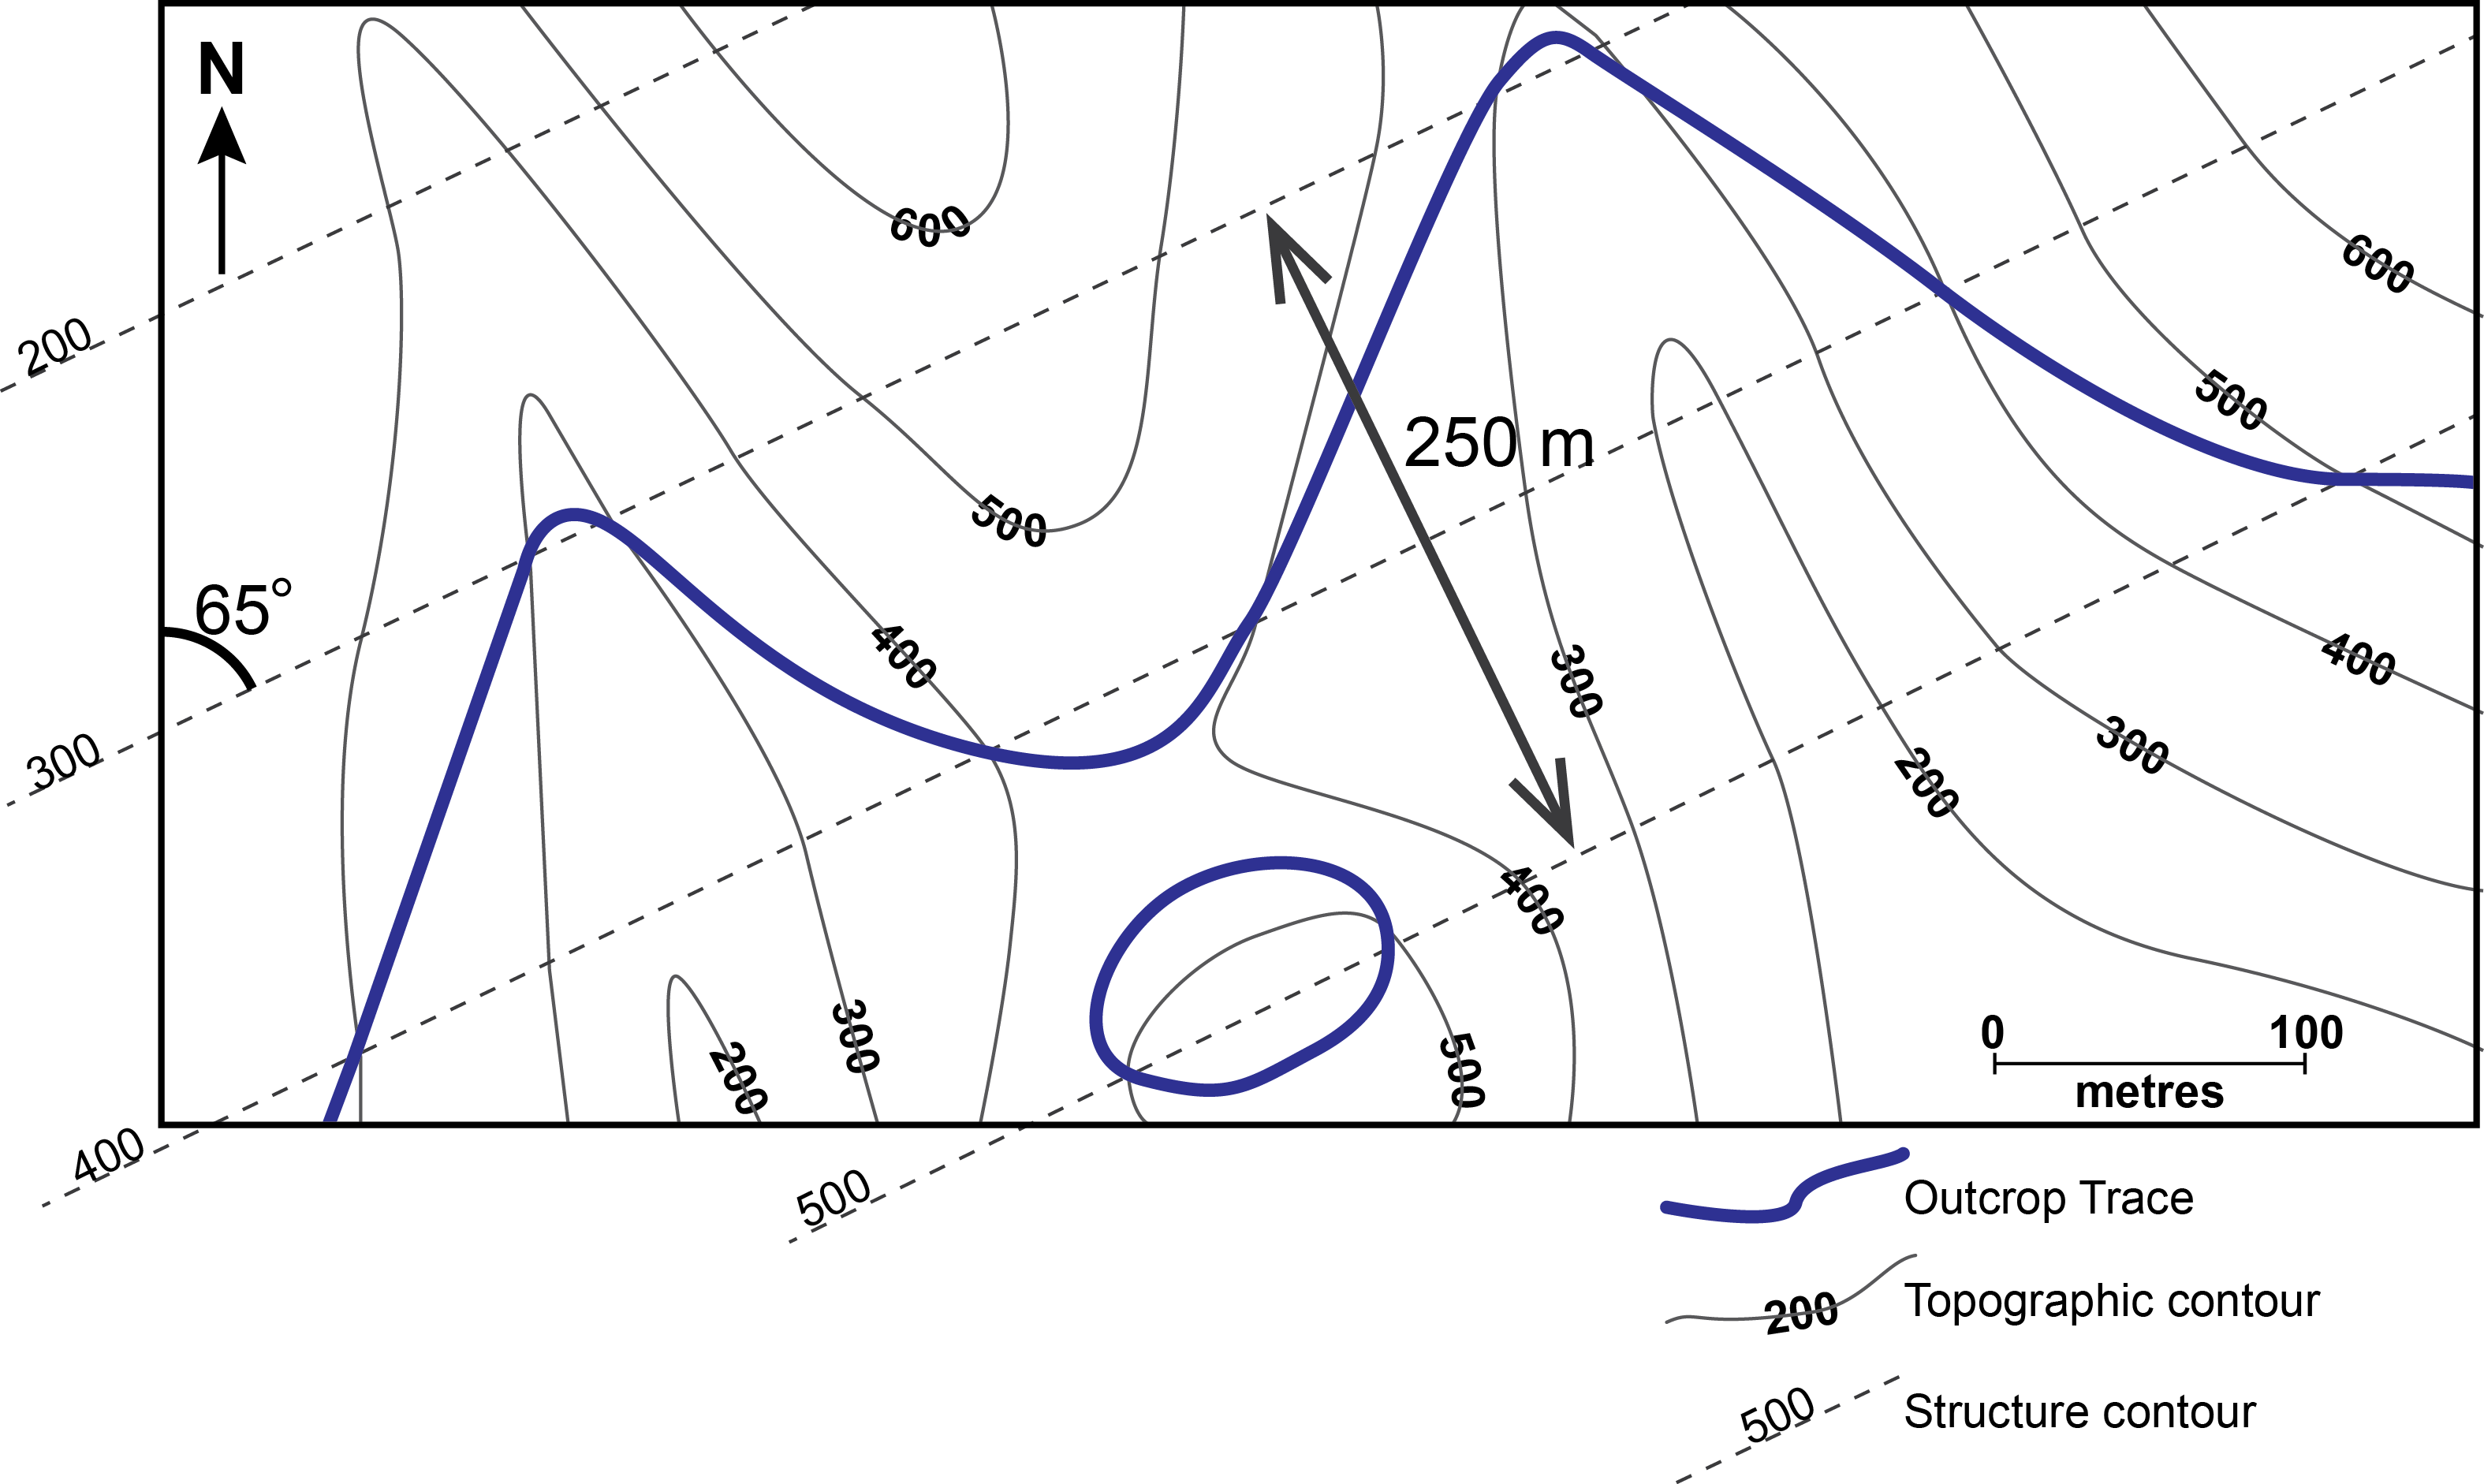 Structure contour construction on the map in Fig. 9